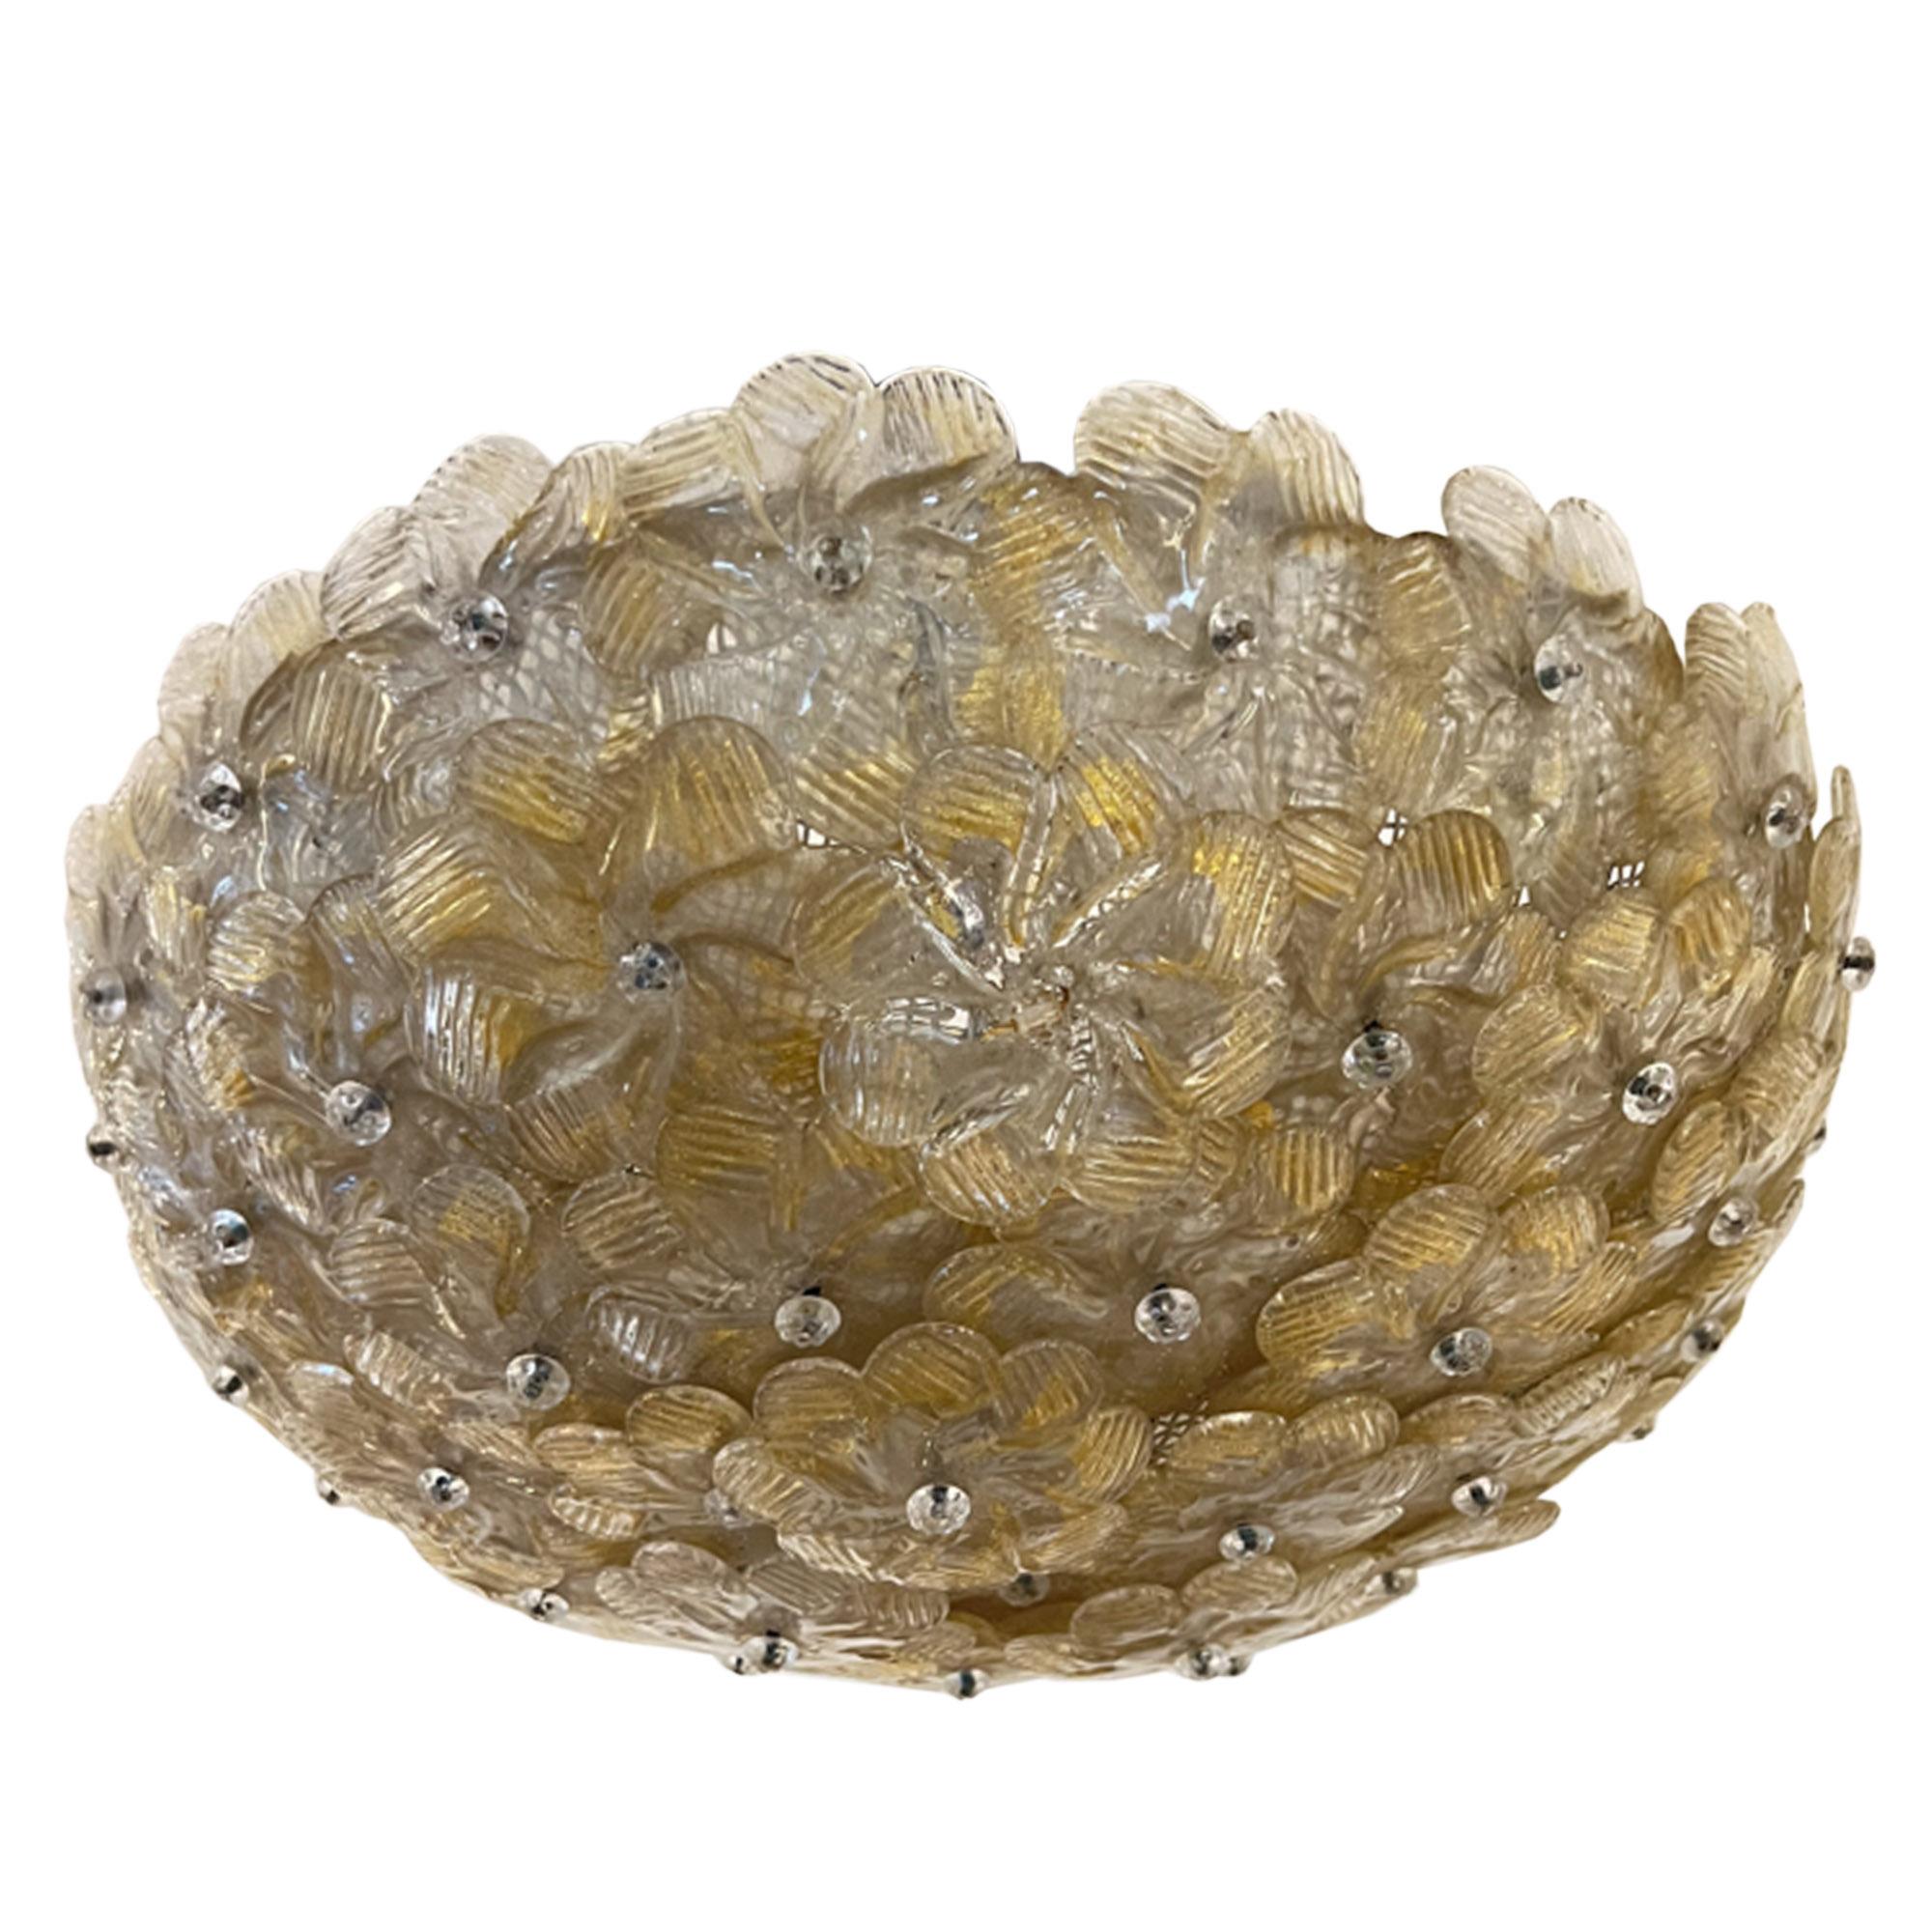 This beautiful Italian 1970s light is made from tessellated Murano glass flowers on a metal frame. 

The handmade flowers have a lovely faint gold colour to them - attractive when lit and in natural light too. This delicate, pretty design will